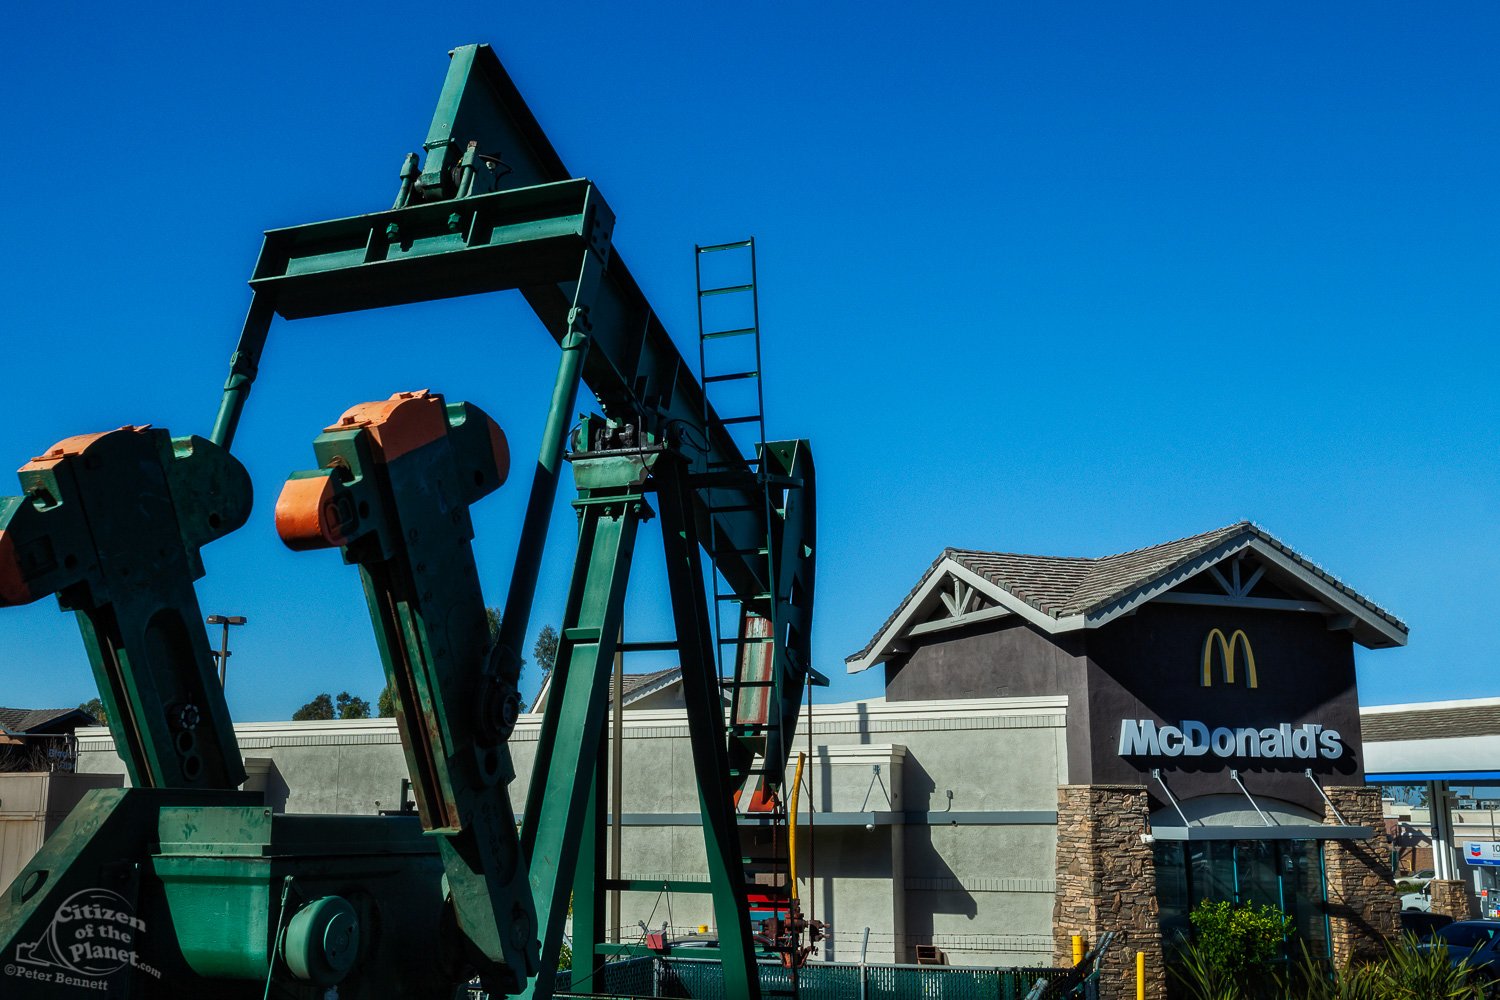  Oil well and pumpjacks next to a McDonald's in the City of Signal Hill. 